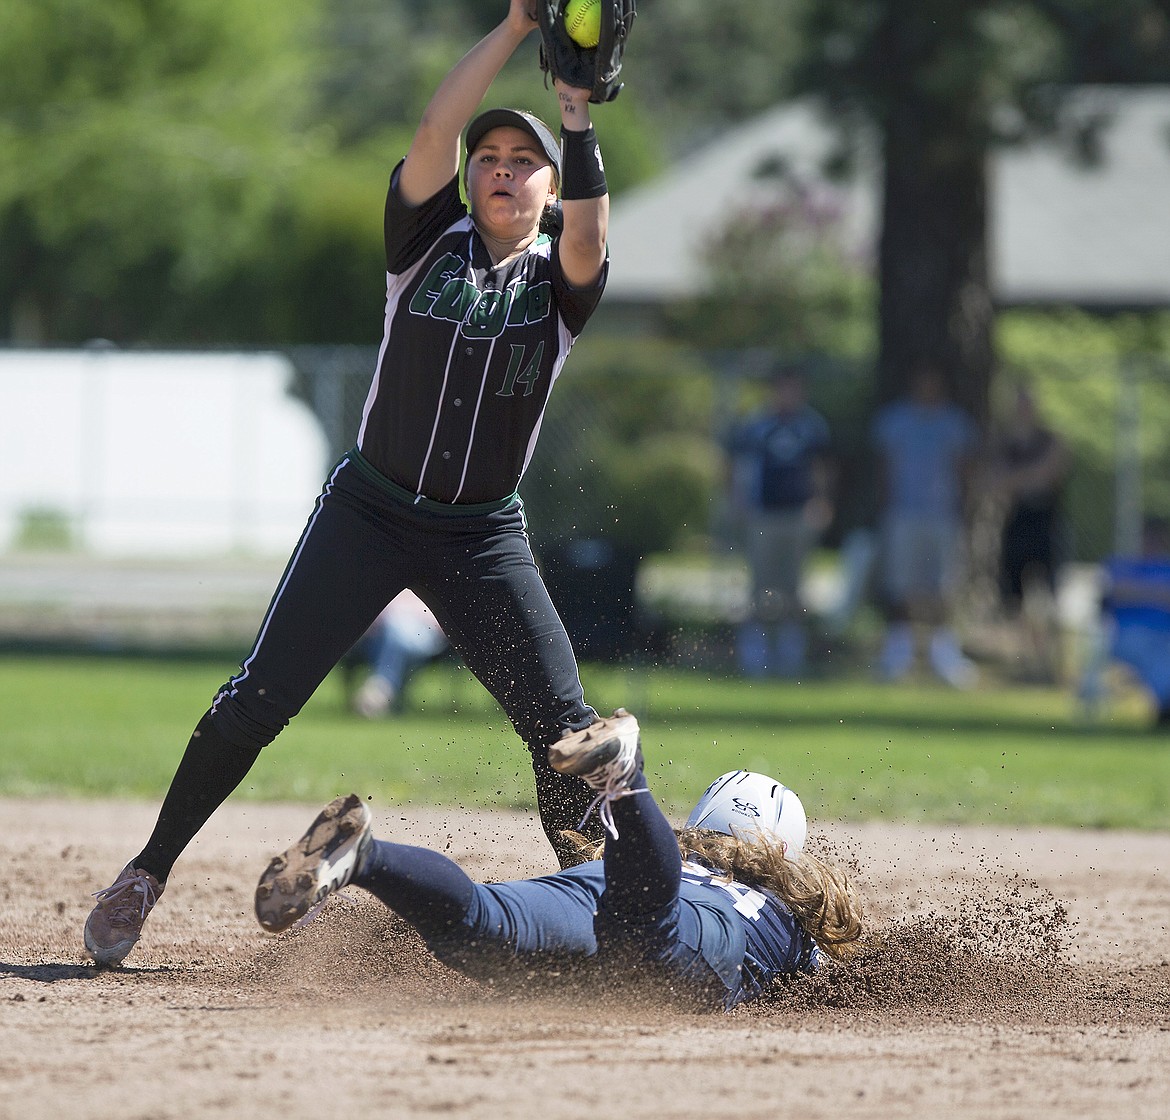 LISA JAMES/PressHaley Loffer of Lake City slides into 2nd as Kelly Kukla of Eagle catches the pass during the 5th inning of their first game of the 5A State Championship at Coeur D'Alene High School on Sunday.